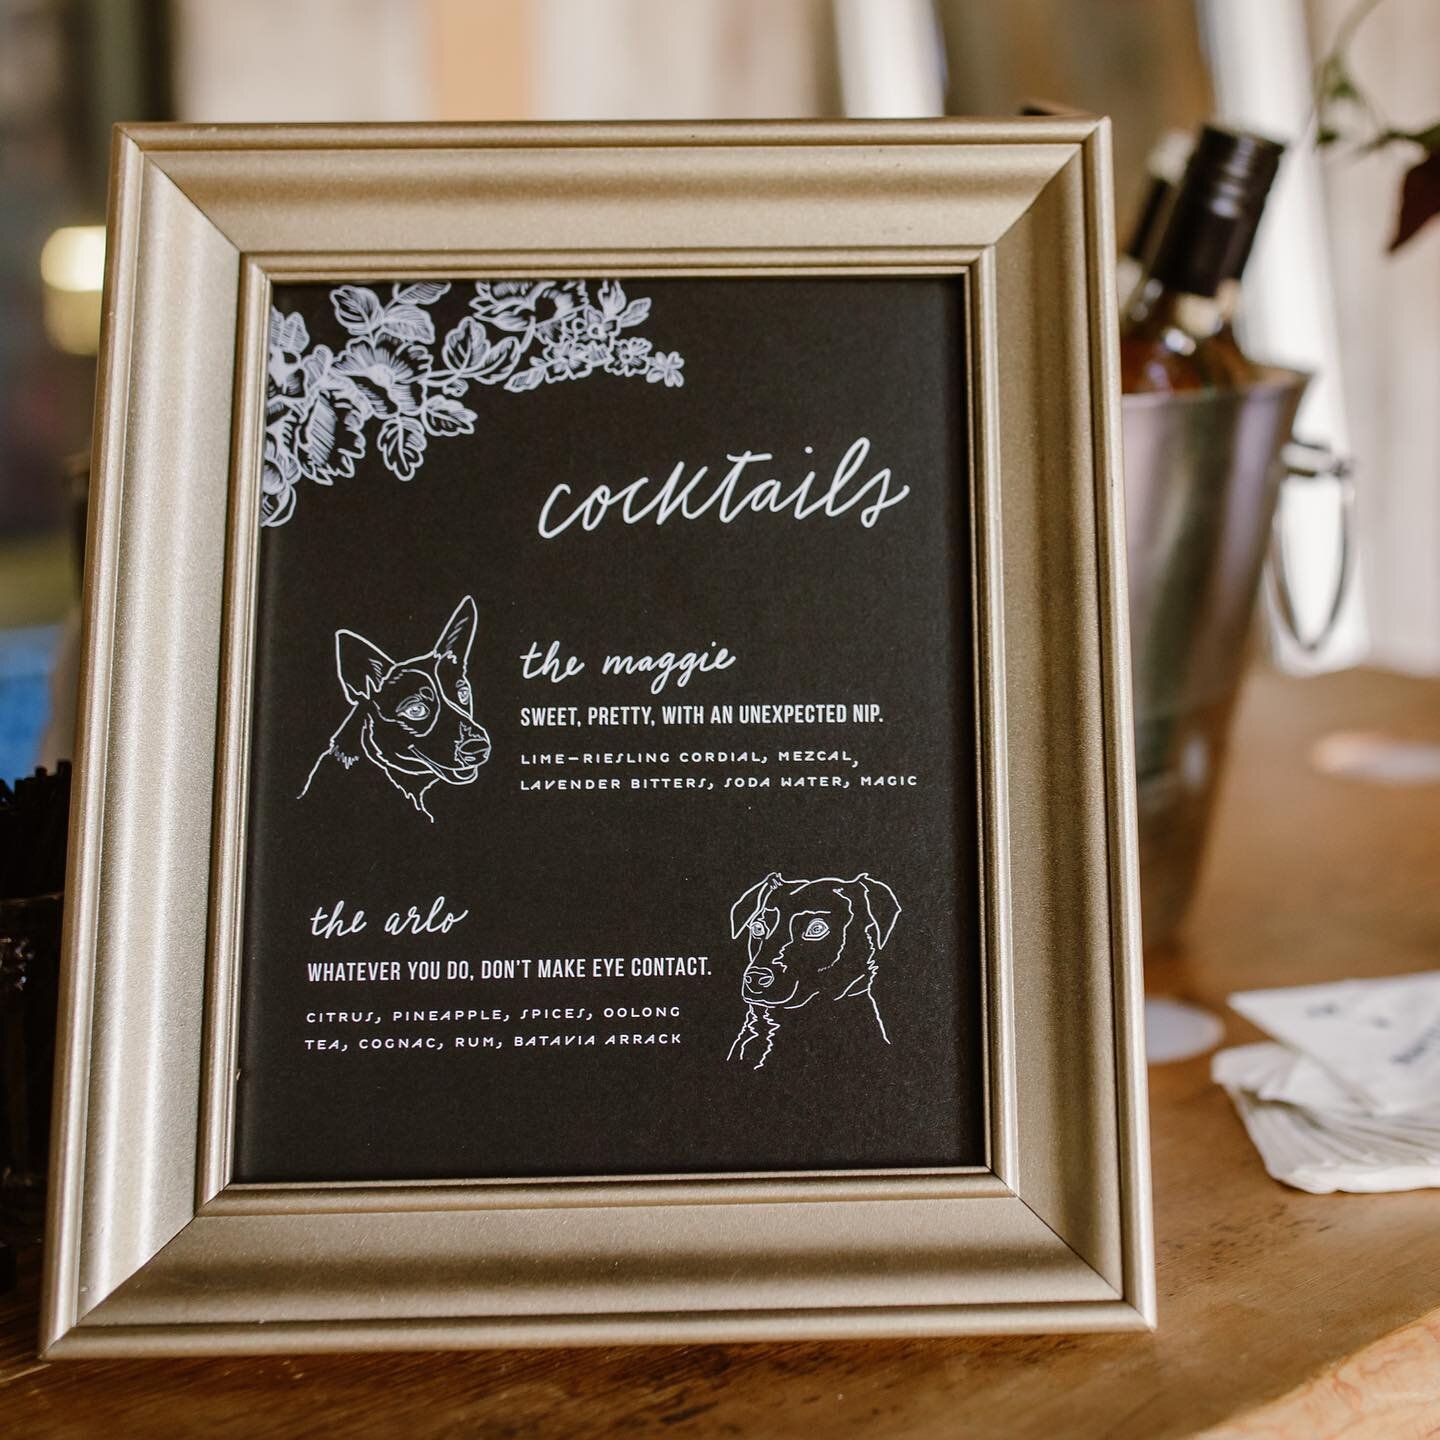 In (slightly belated) honor of national dog day and Saben and Molly&rsquo;s wedding anniversary, here&rsquo;s a shot of the custom cocktail menu I did for their reception. Their dogs, Arlo and Maggie, were the inspiration for the evening&rsquo;s cock